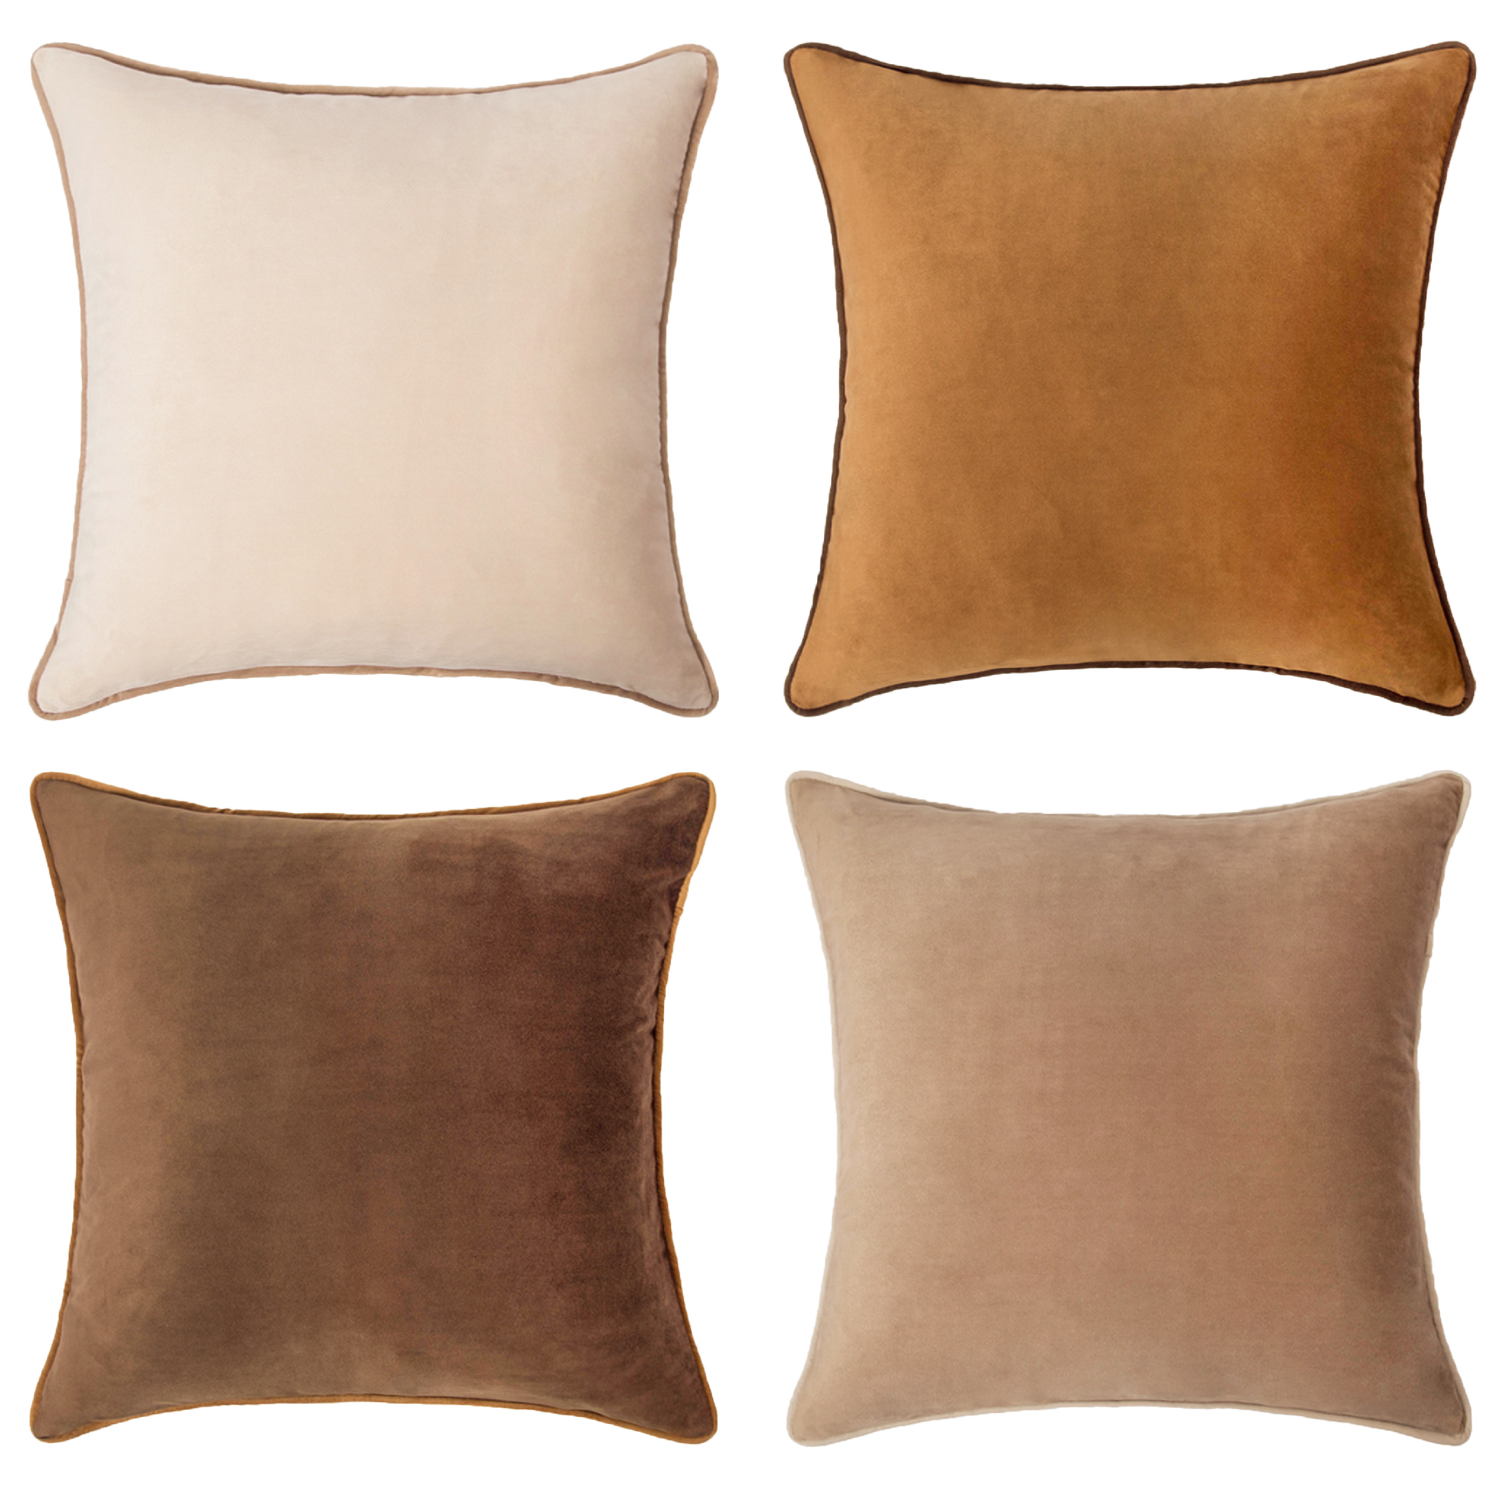 WEMEON Velvet Decorative Neutral Throw Pillows Covers 20x20inch Set of 4, Solid Color Soft Decorative Square Neutral Pillow Cove